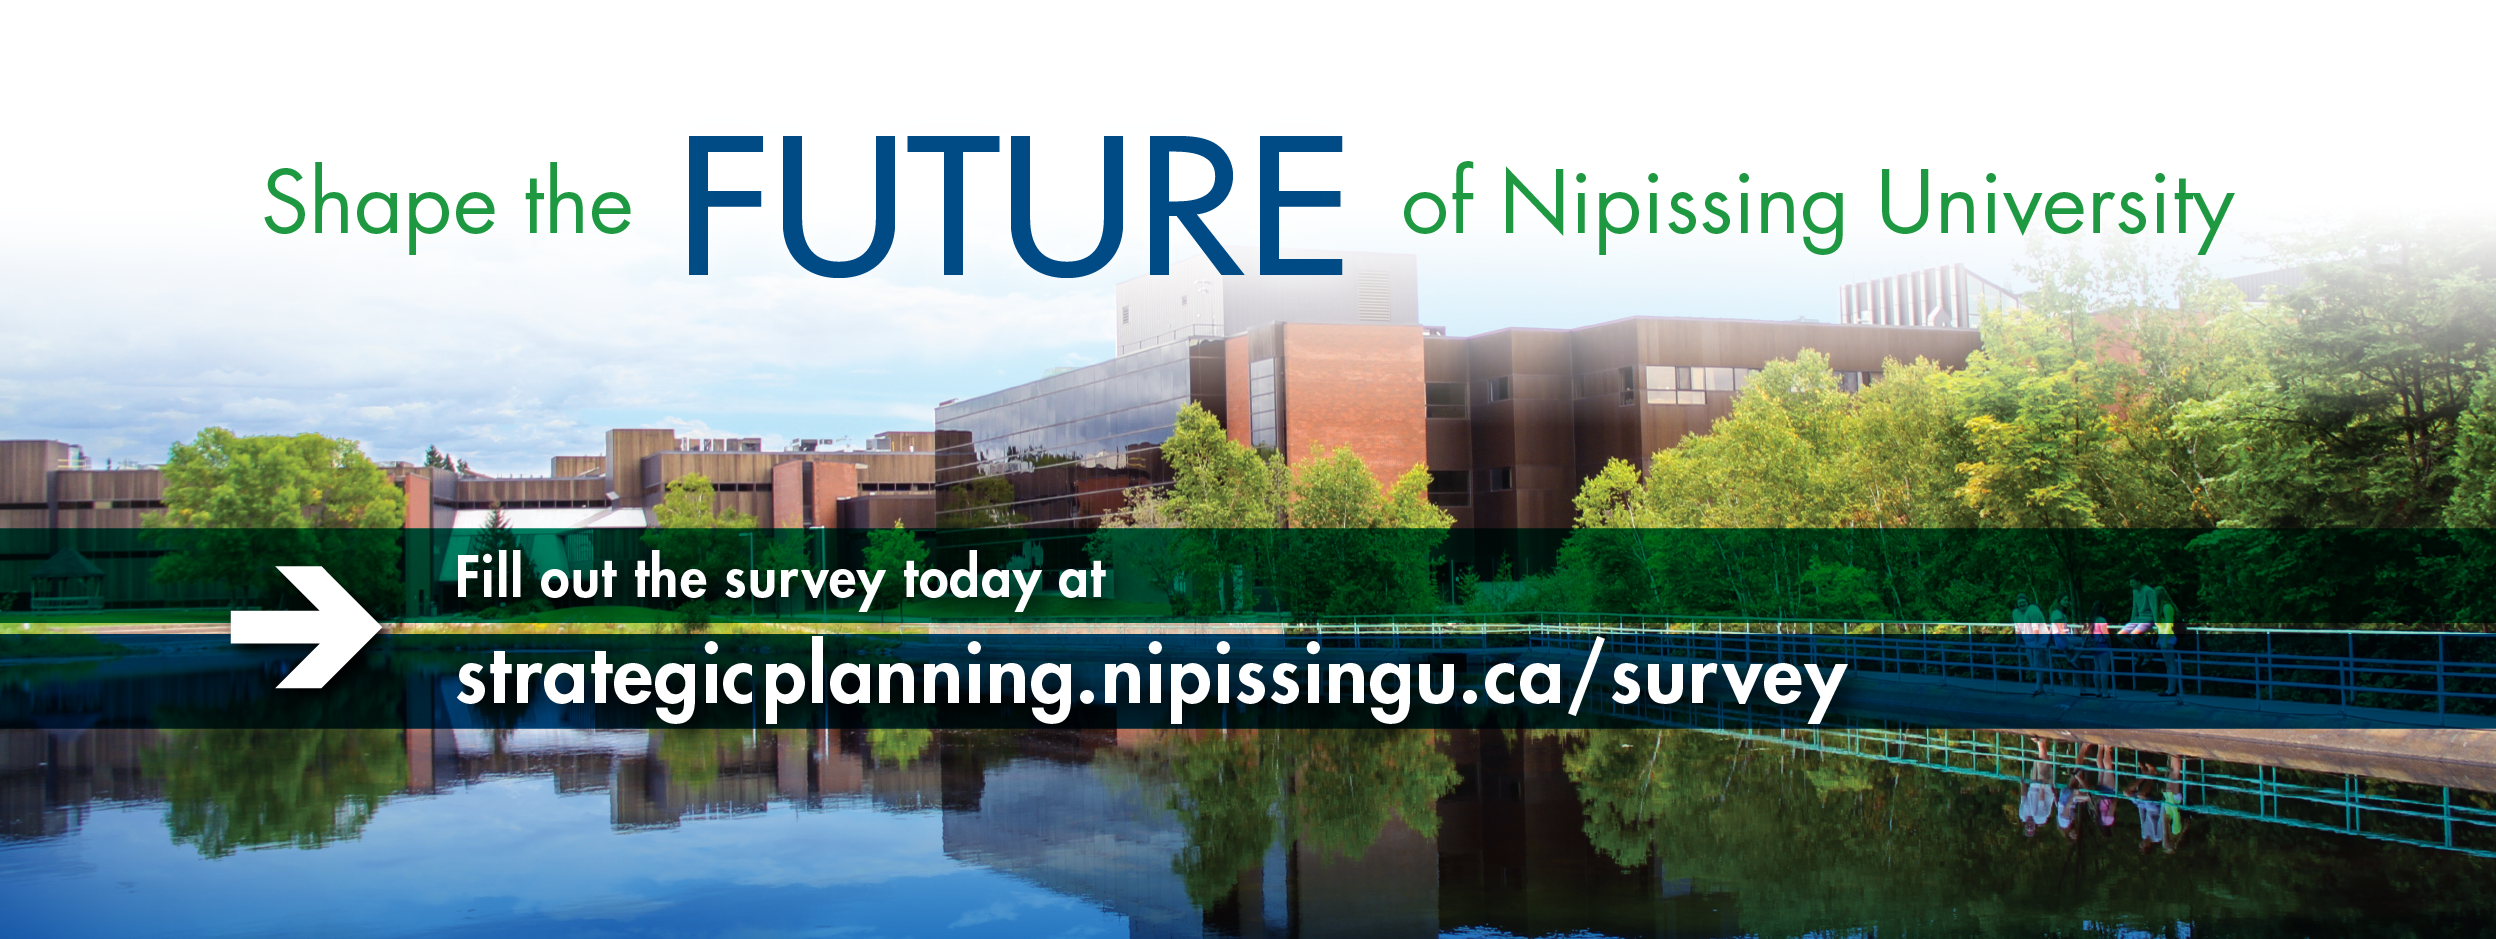 Photo of NU campus with text overlay that says Shape the Future of Nipissing University. Fill out the survey today at strategicplanning.nipissingu.ca/survey